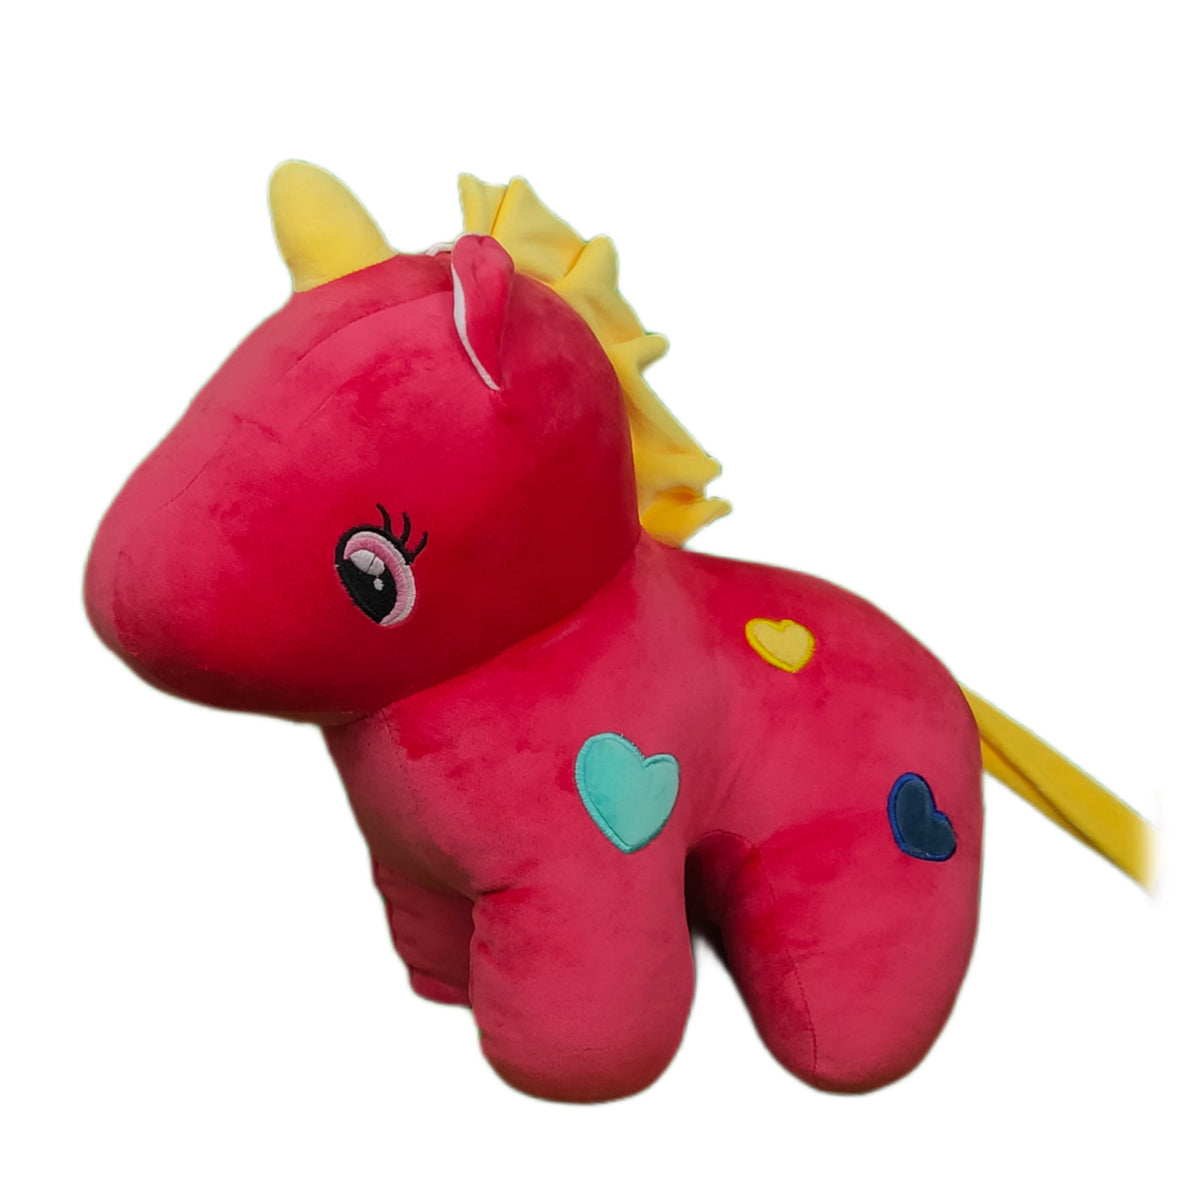 Play Hour Fairy Unicorn Plush Soft Toy For Ages 3 Years And Up - Red, 45cm